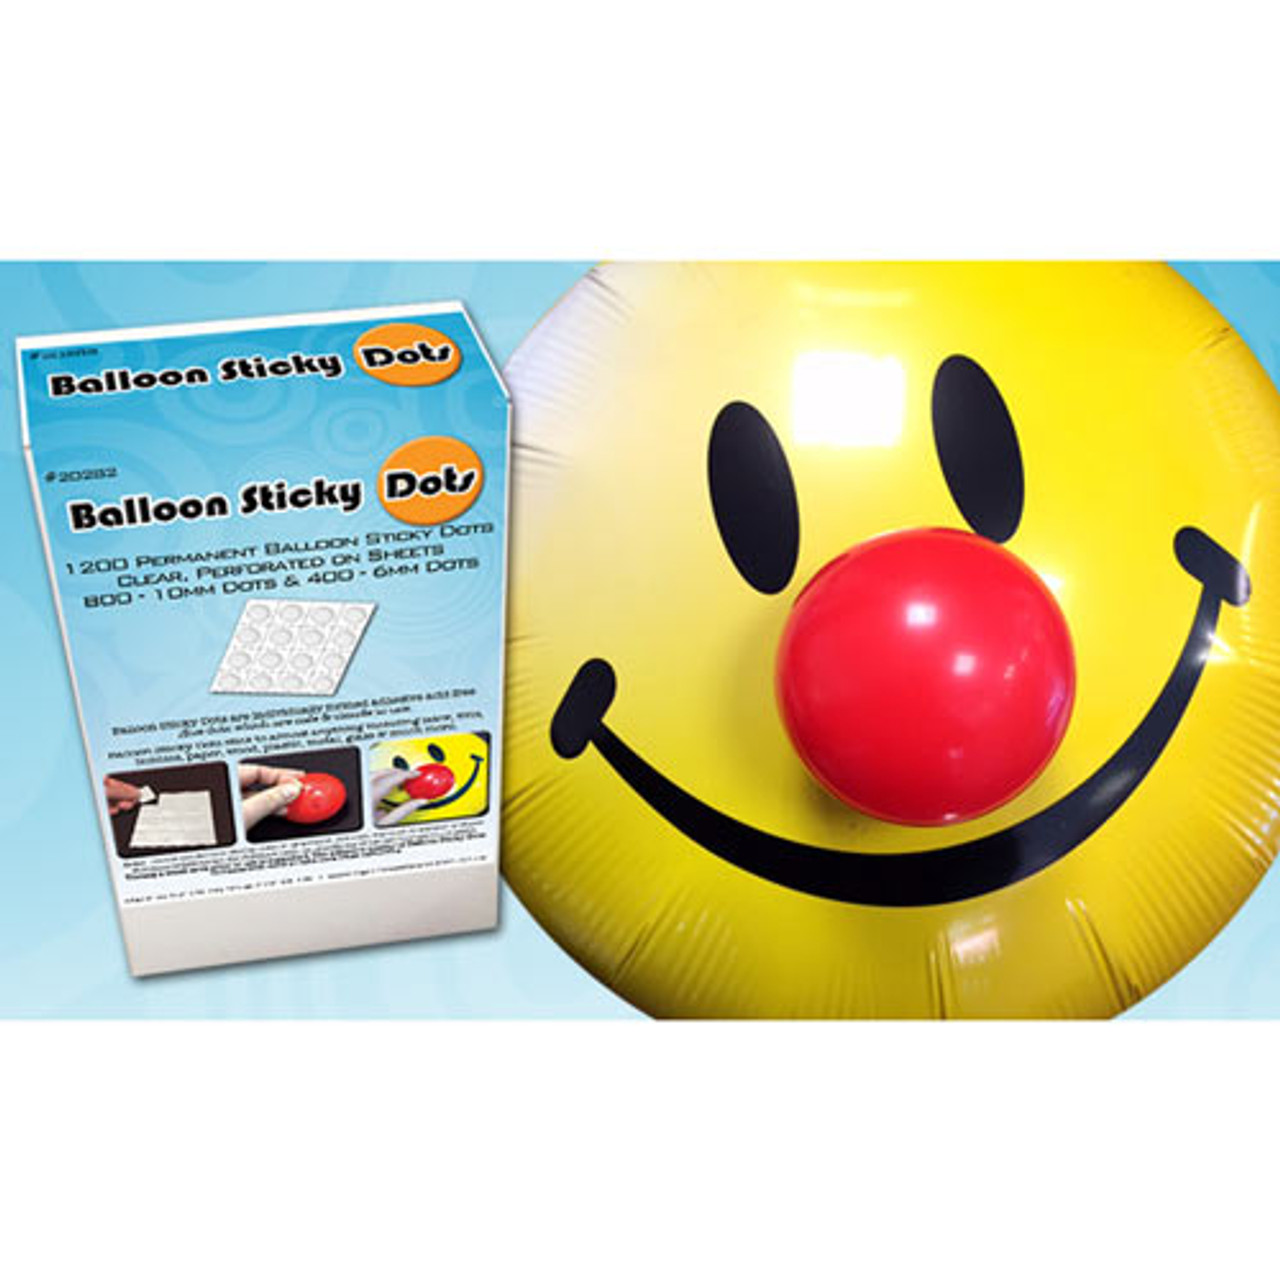 How To Use Glue Dots For Balloon, How To Stick Balloons On Wall